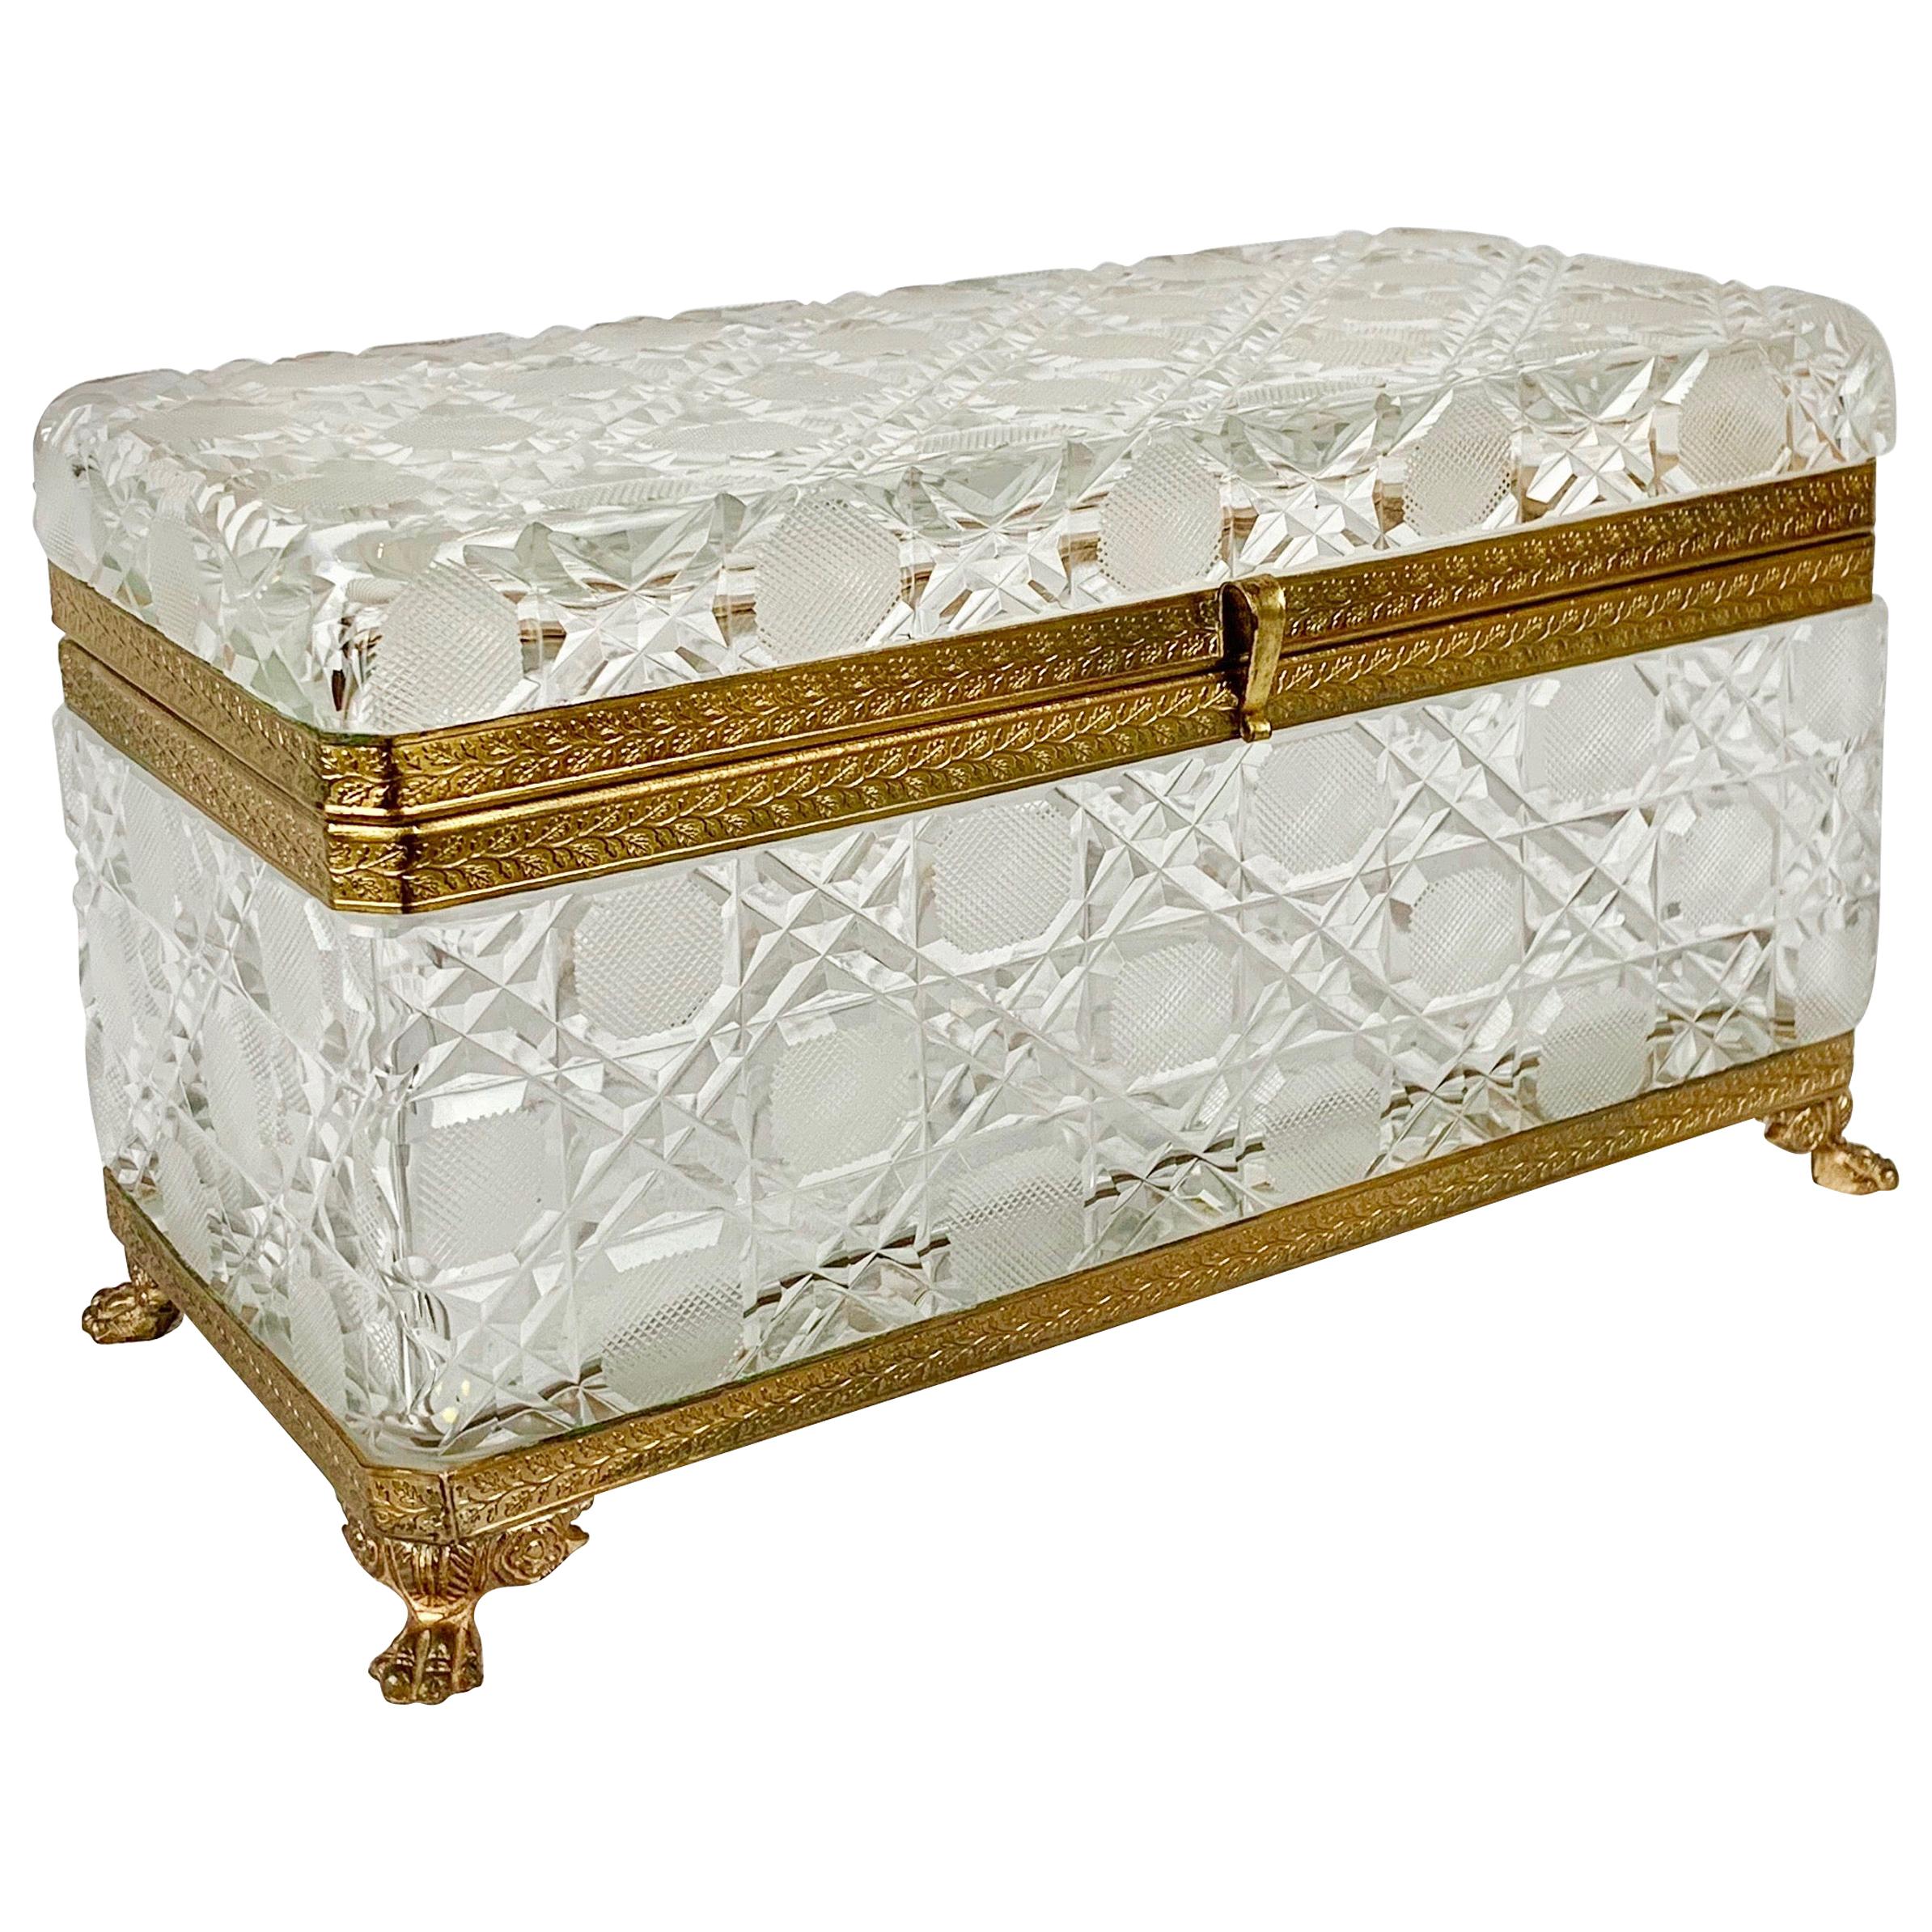  Large Cut Crystal Box with a Gilt Frame in the Cane or Hobnail Pattern